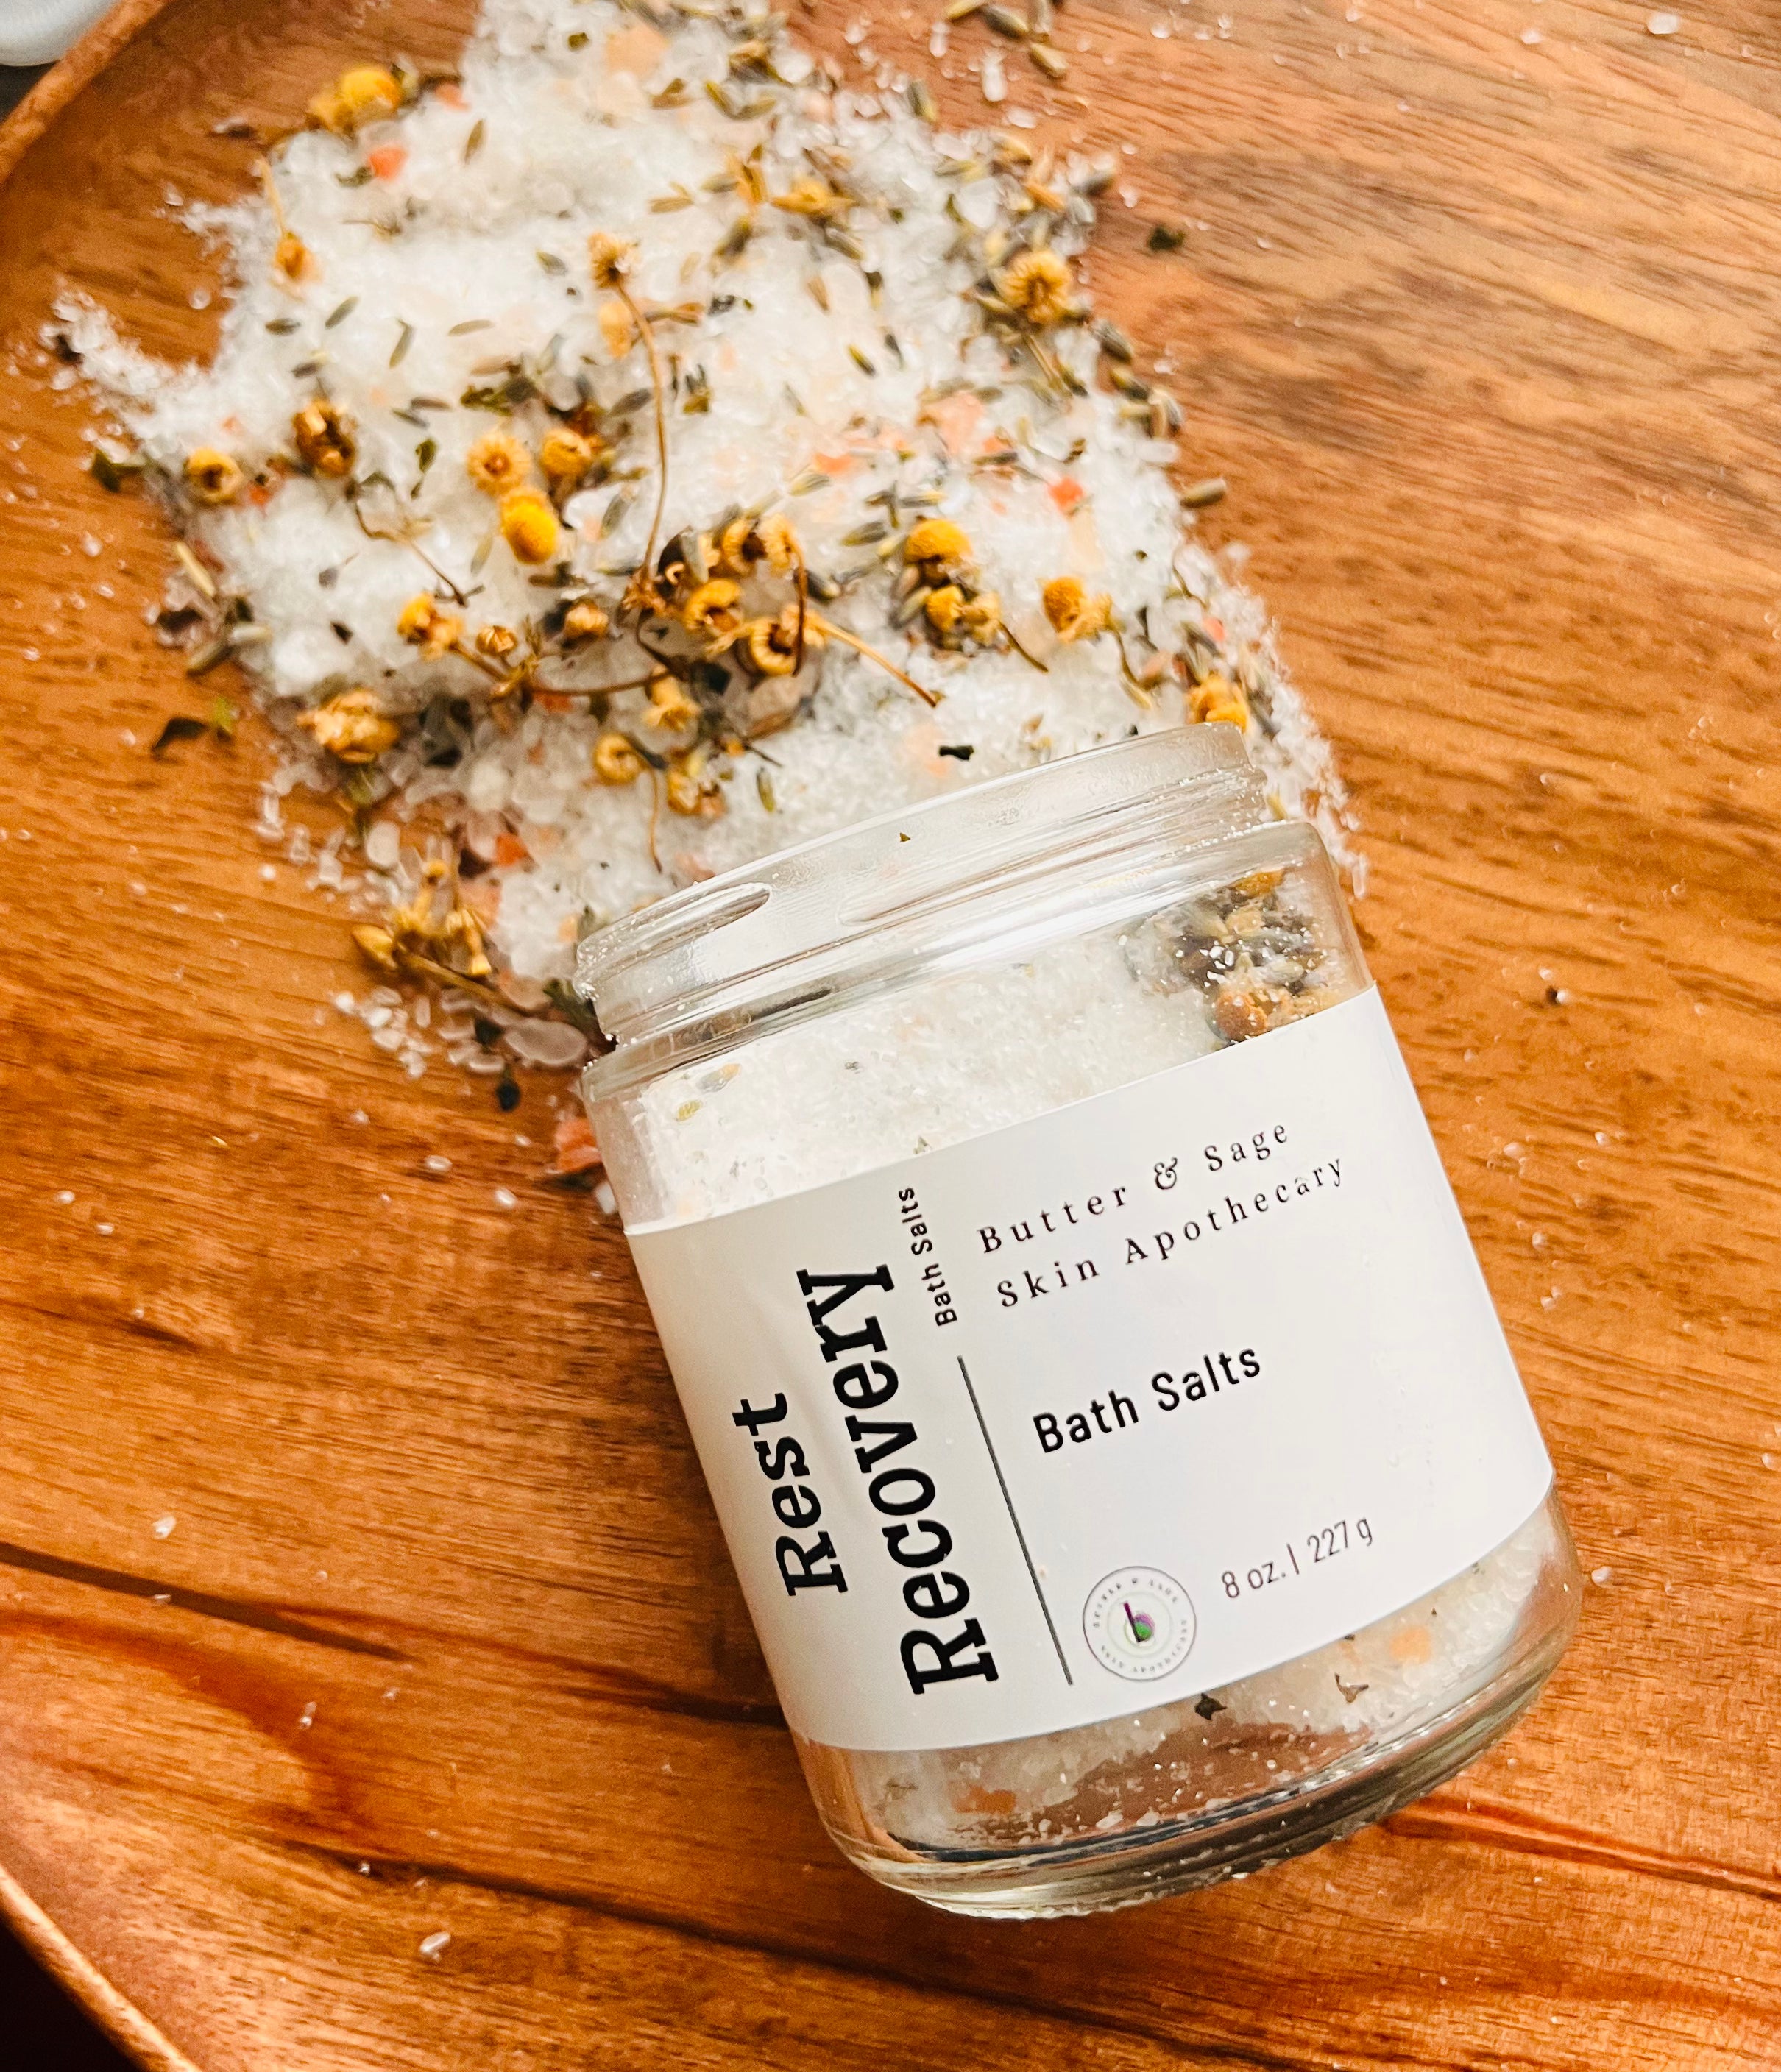 Rest & Recovery Bath Salts